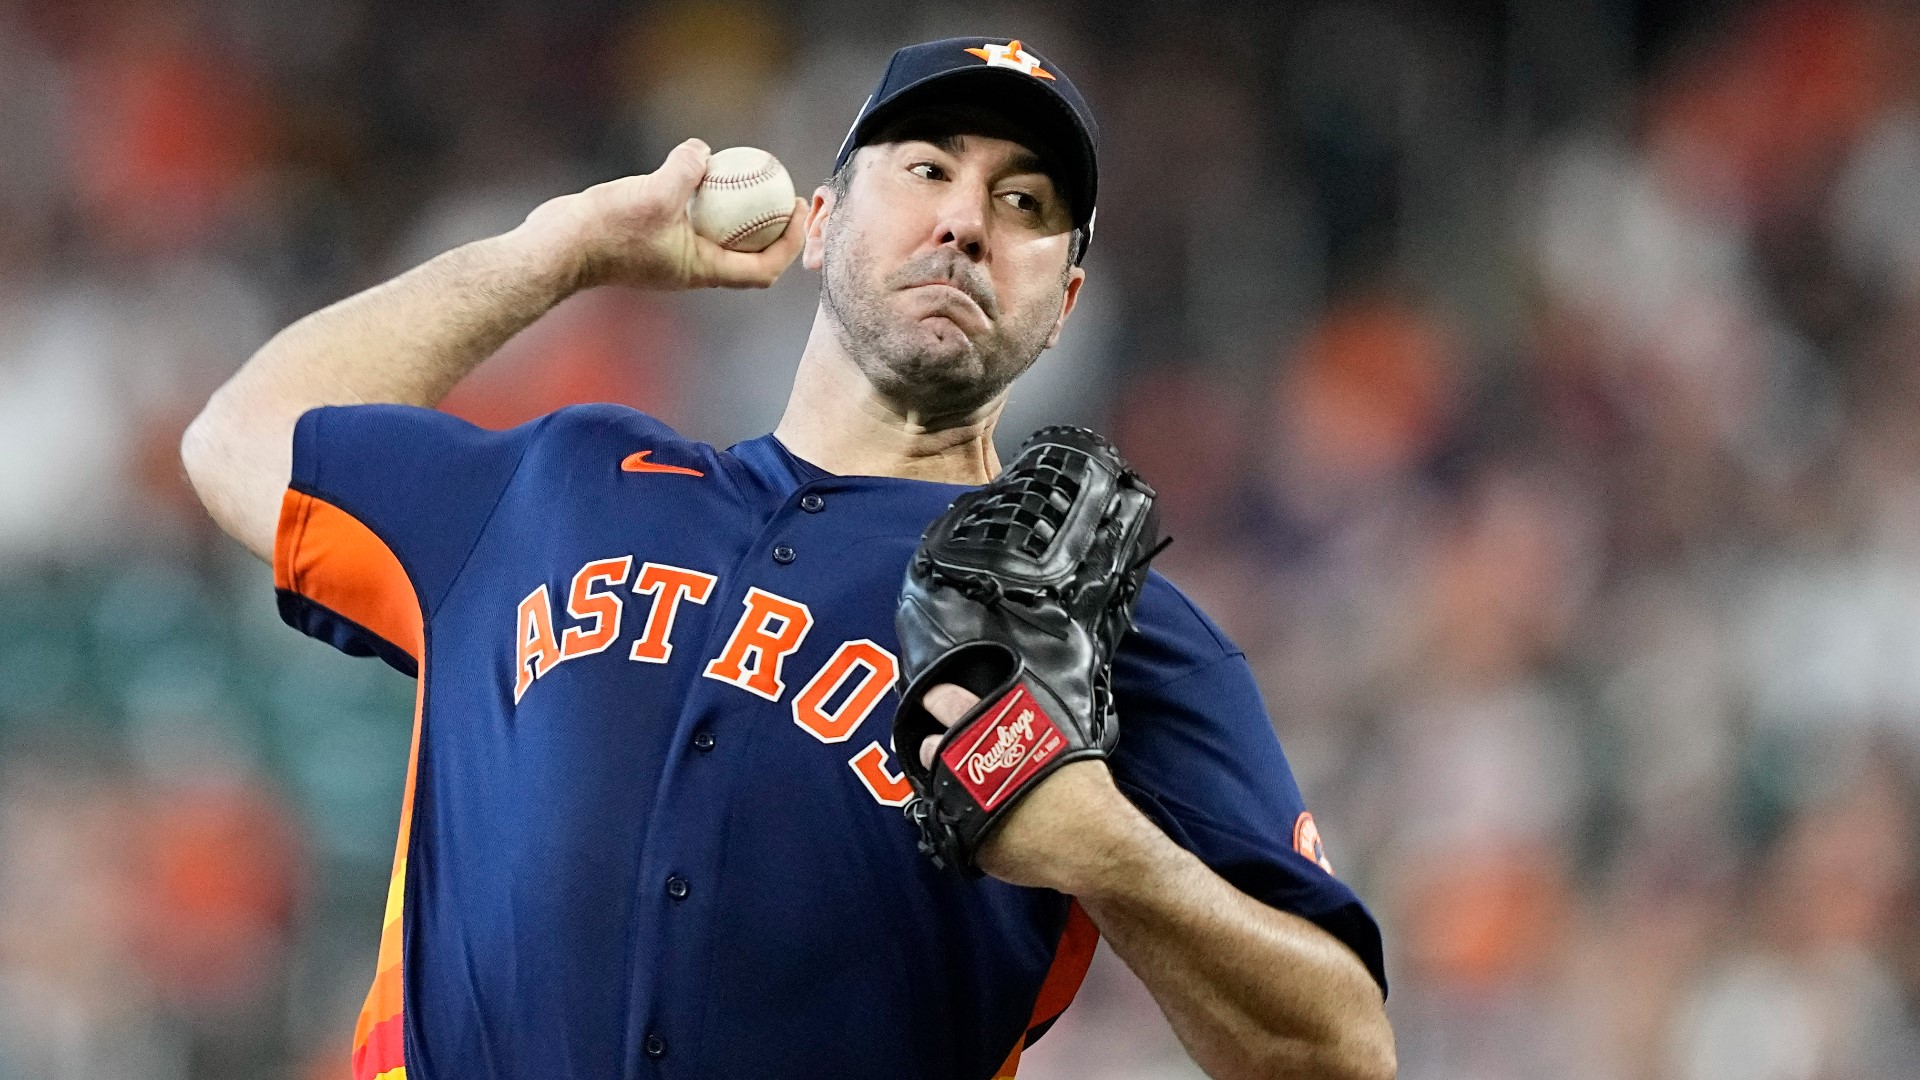 Justin Verlander was pulled after throwing three inning on Sunday against the Baltimore Orioles.